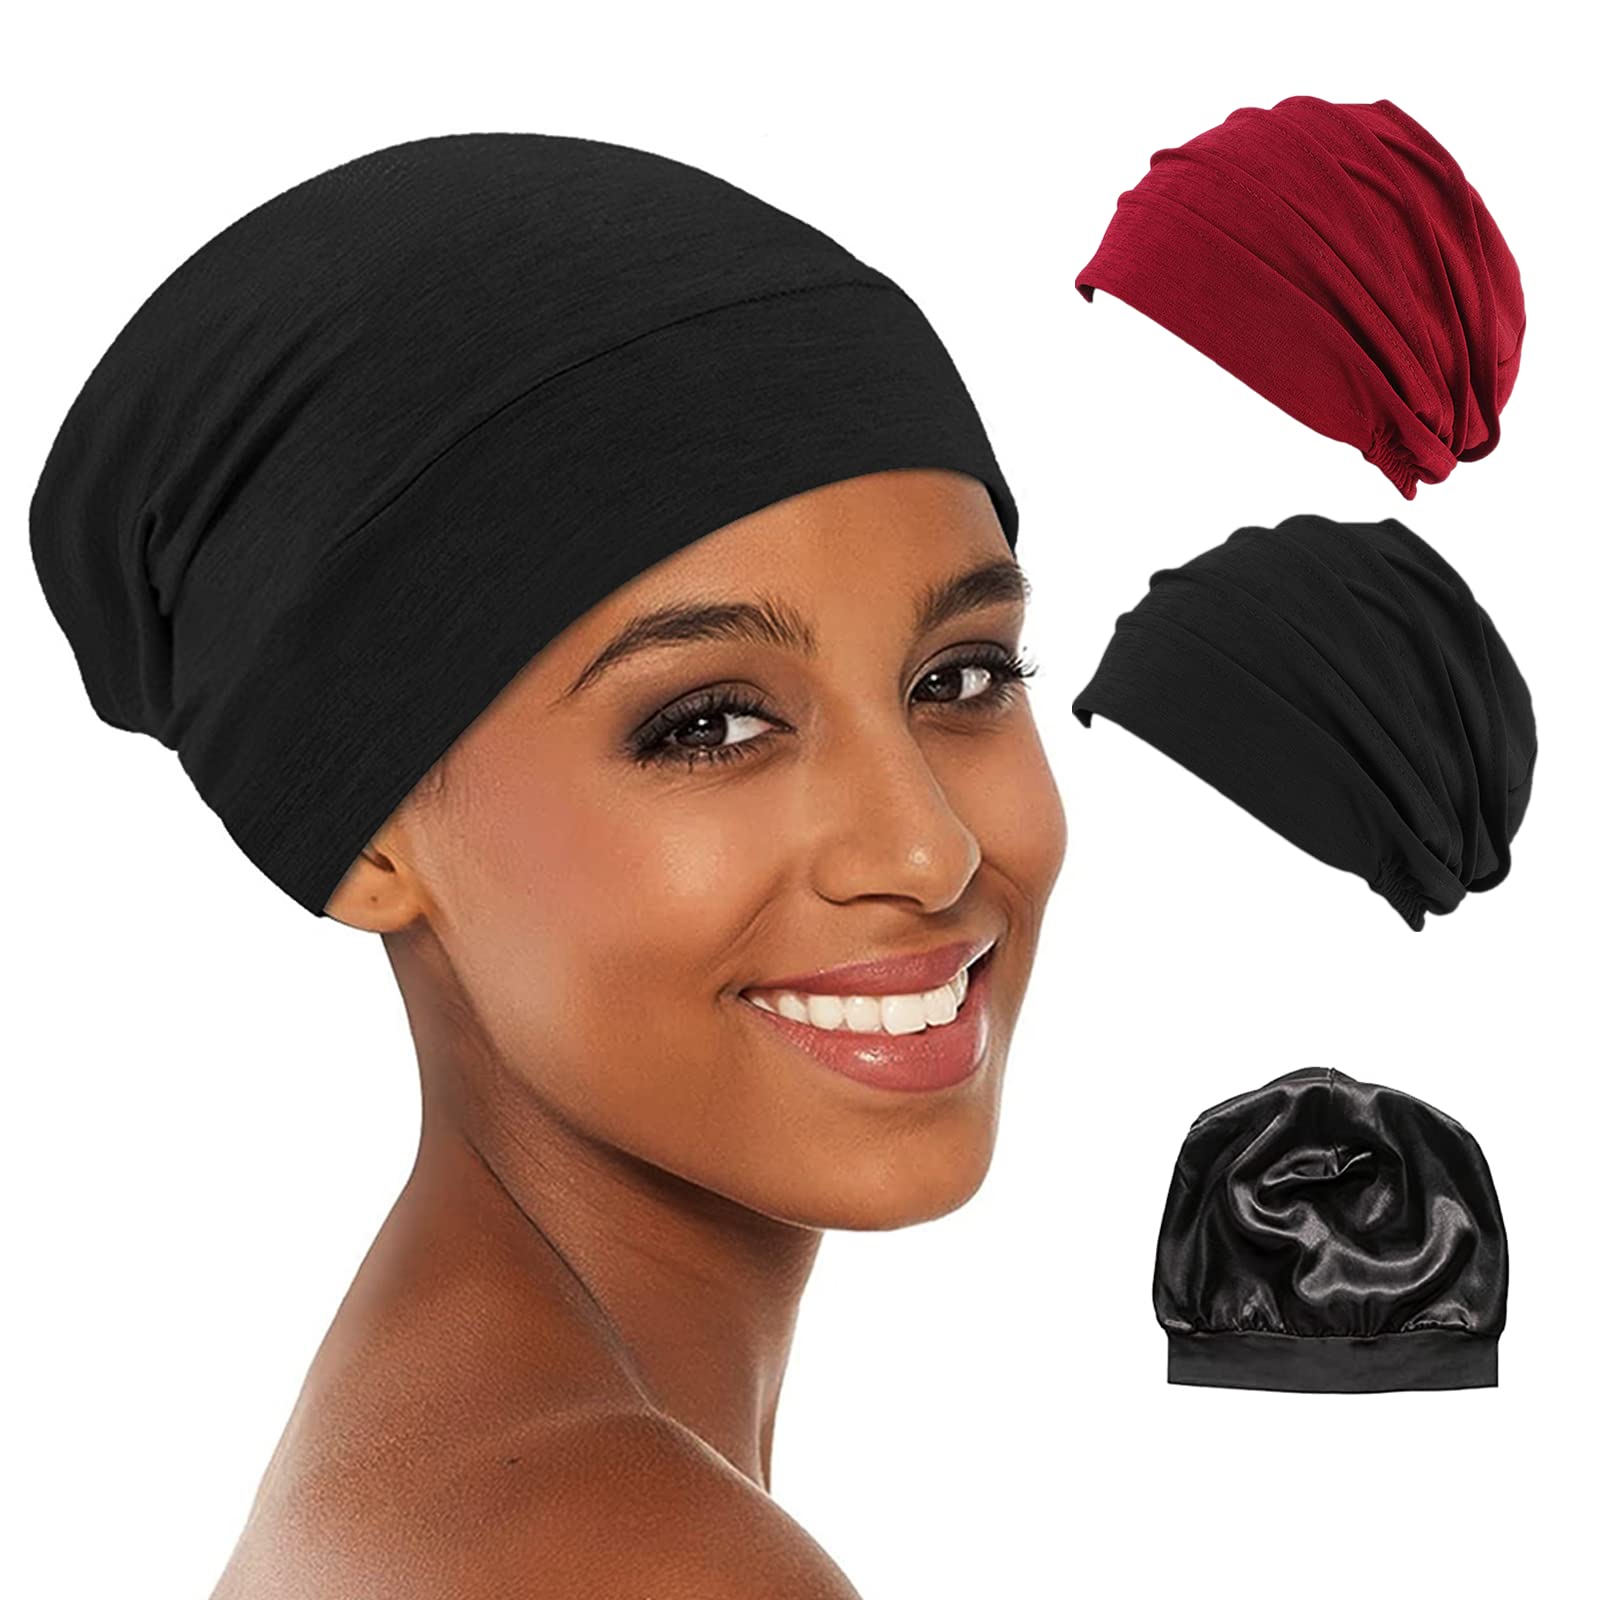 More than Children's Bonnets and Durags: A New Look